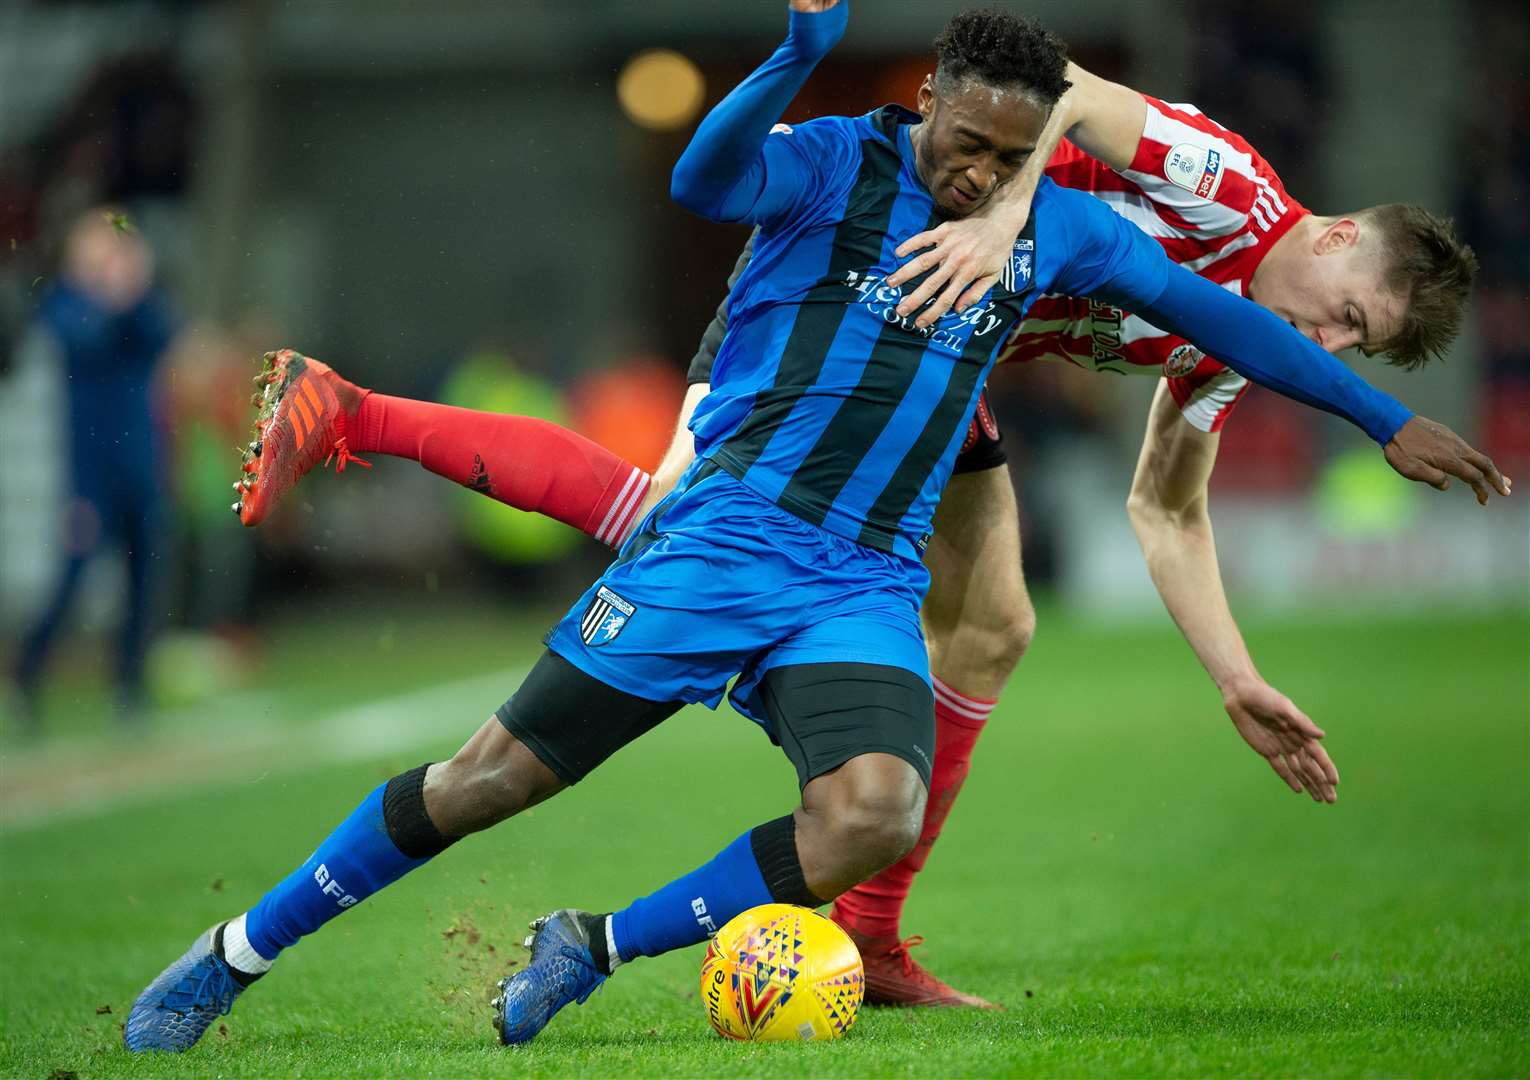 Brandon Hanlan challenges with Jimmy Dunne in the league game at Sunderland last season